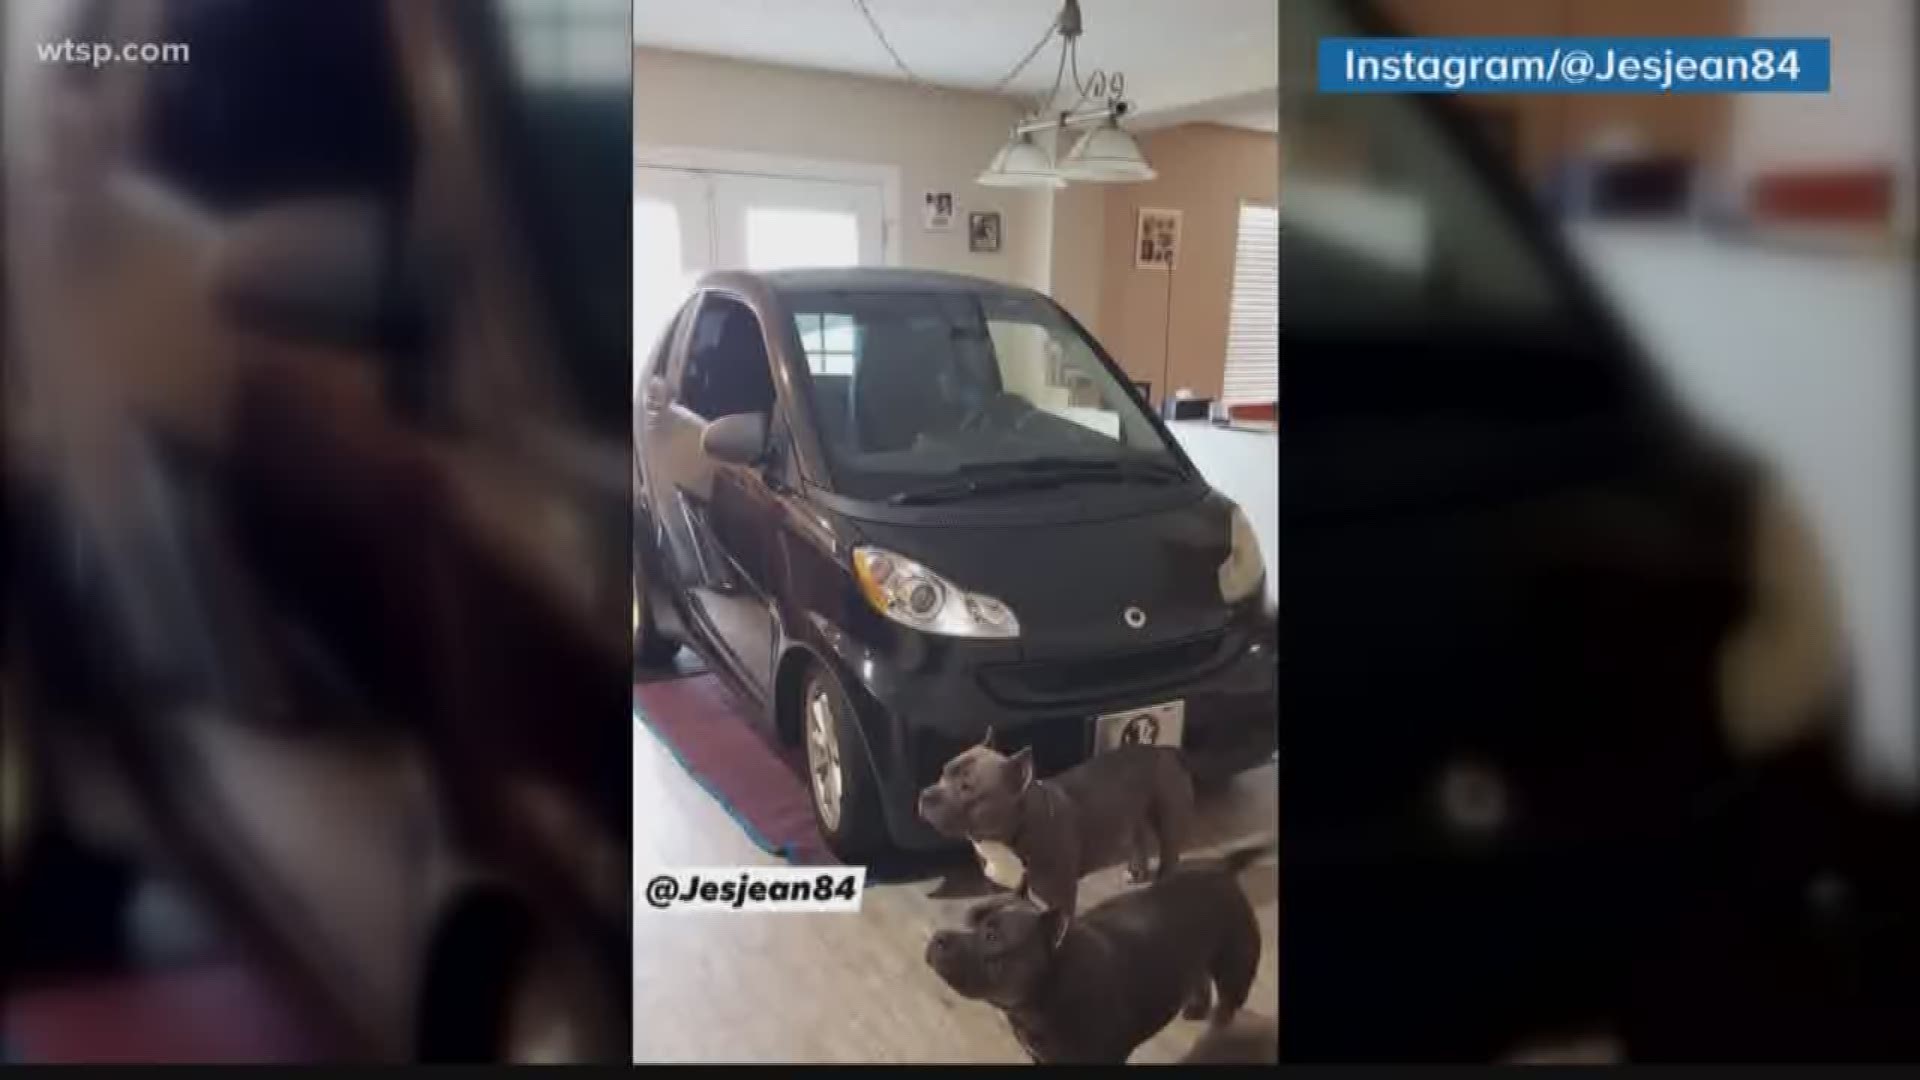 It started as a light-hearted challenge between a Florida couple, can a Smart car fit into their kitchen? The answer: Yes it can.

Patrick Eldridge parked his smart car in his kitchen to protect it from Hurricane Dorian because he didn't want it to "blow away" and to prove that he can park his car there.